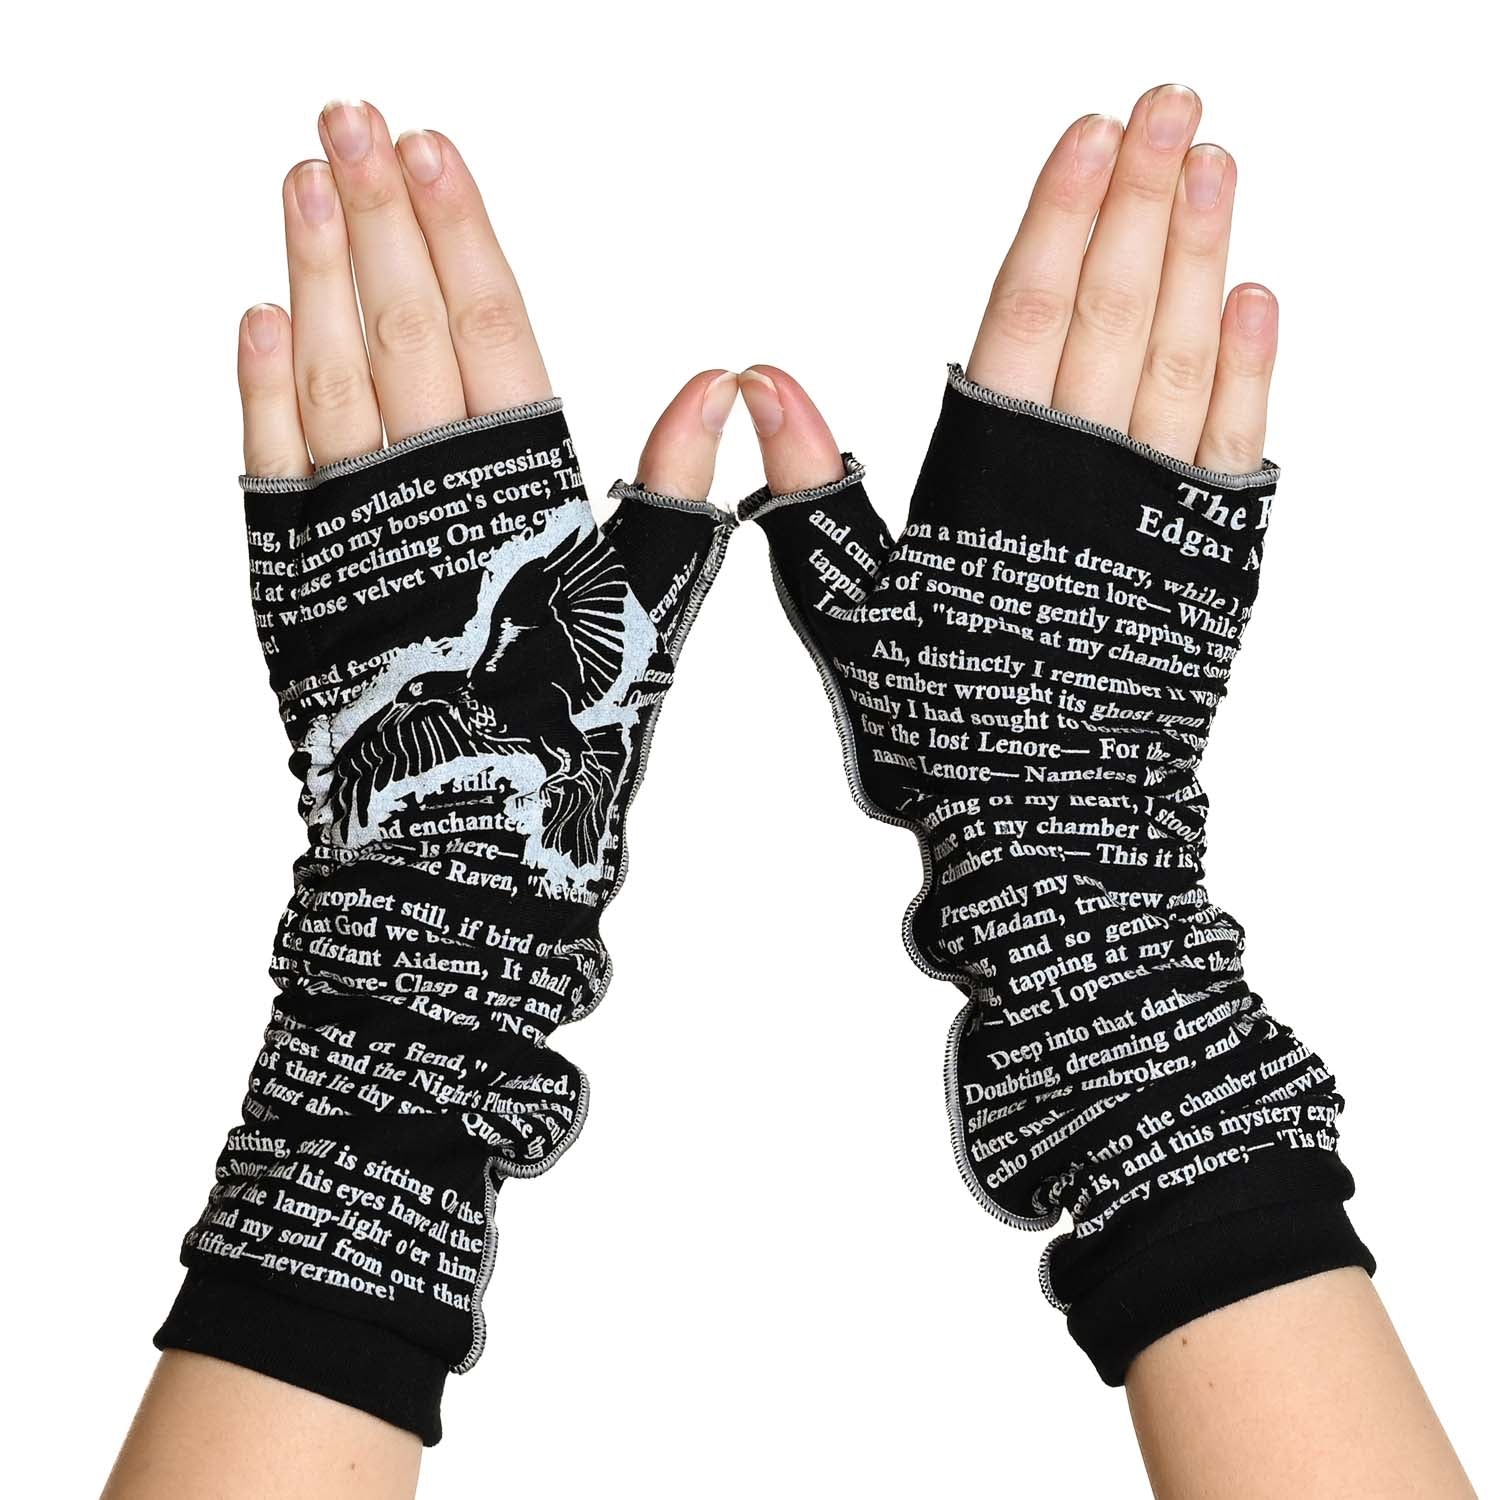 12 Statement Gloves That Will Make You Excited About Getting